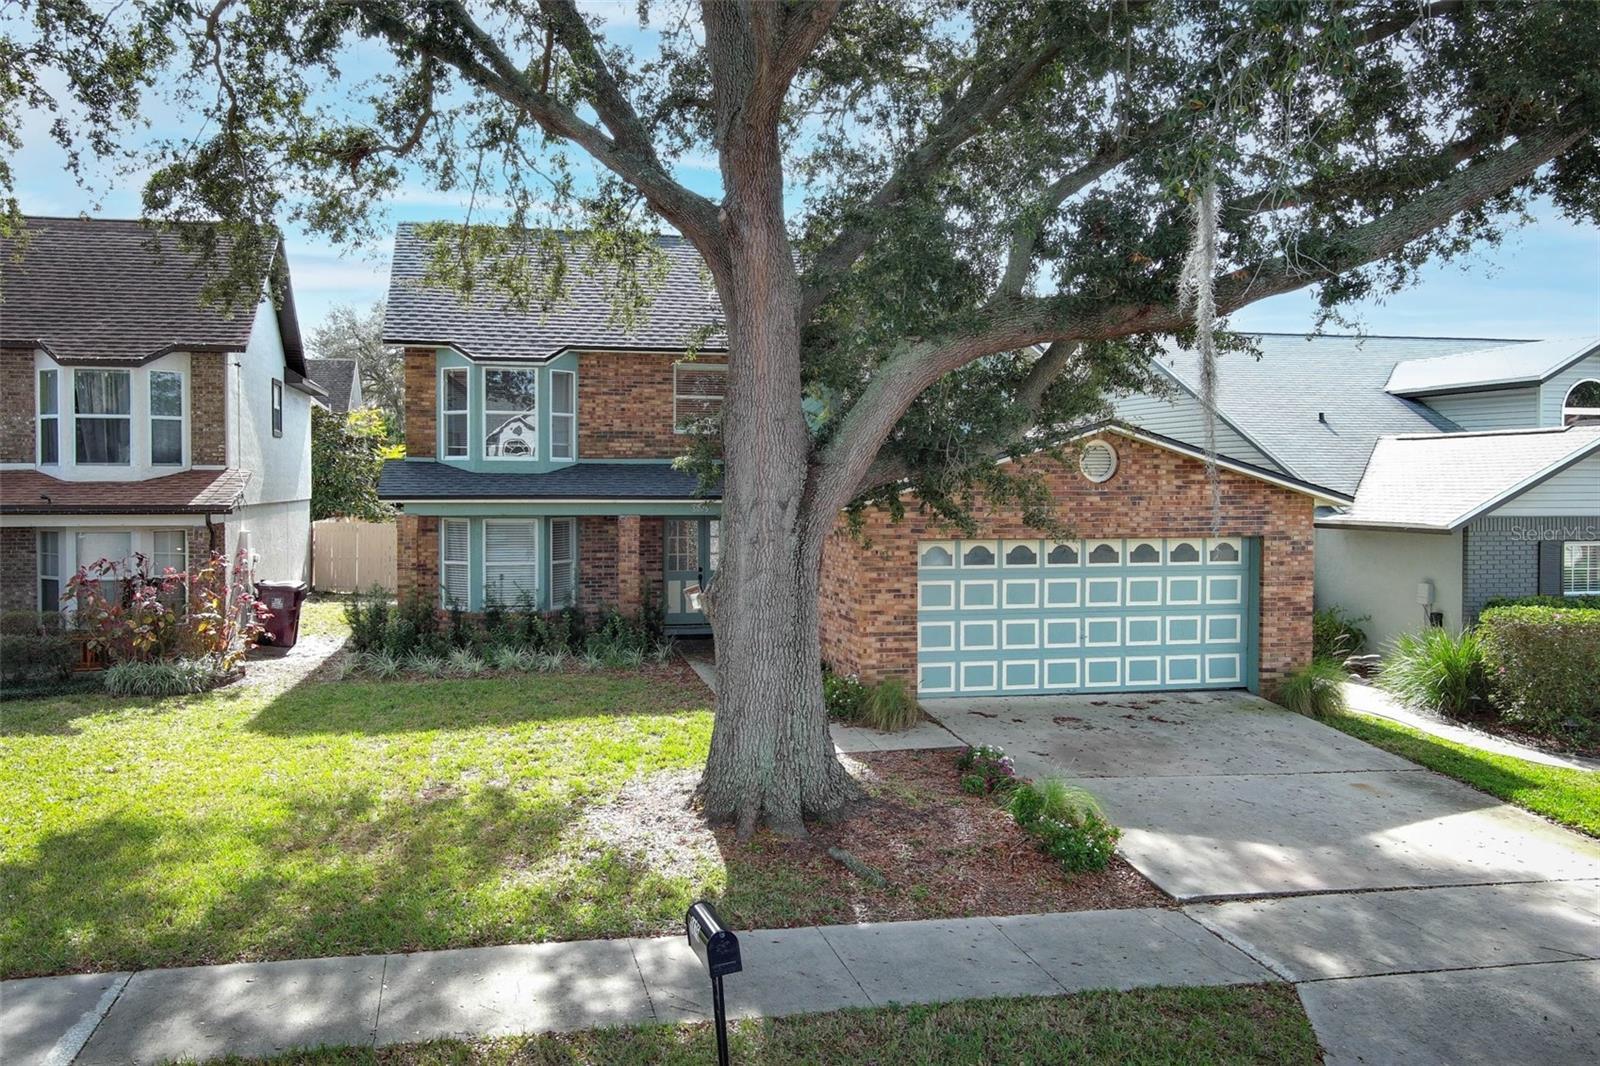 3075 TALL TIMBER DRIVE, ORLANDO, Single-Family Home,  for sale, InCom Real Estate - Sample Office 